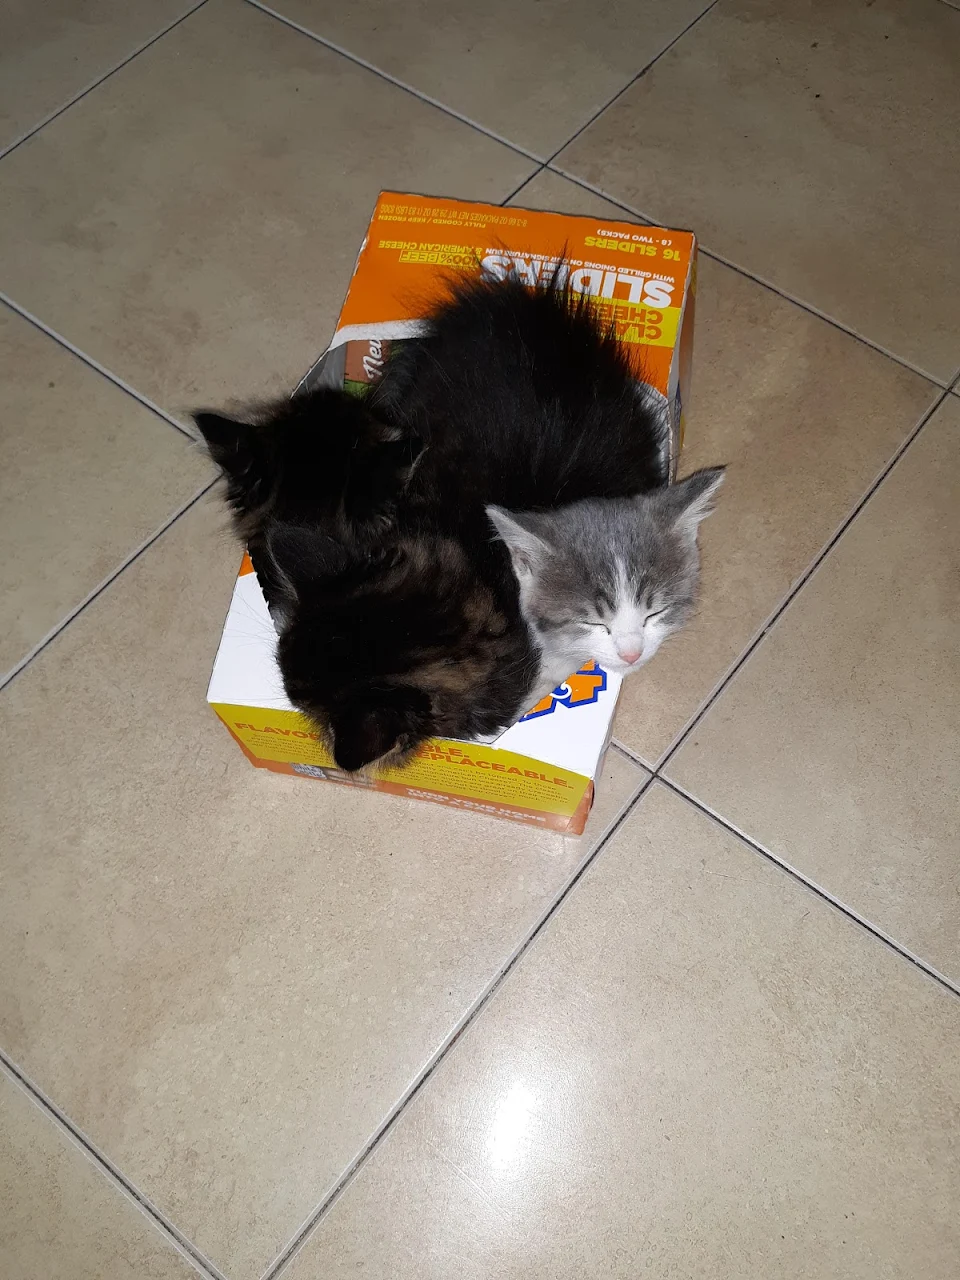 Just 4 kittens napping in a box